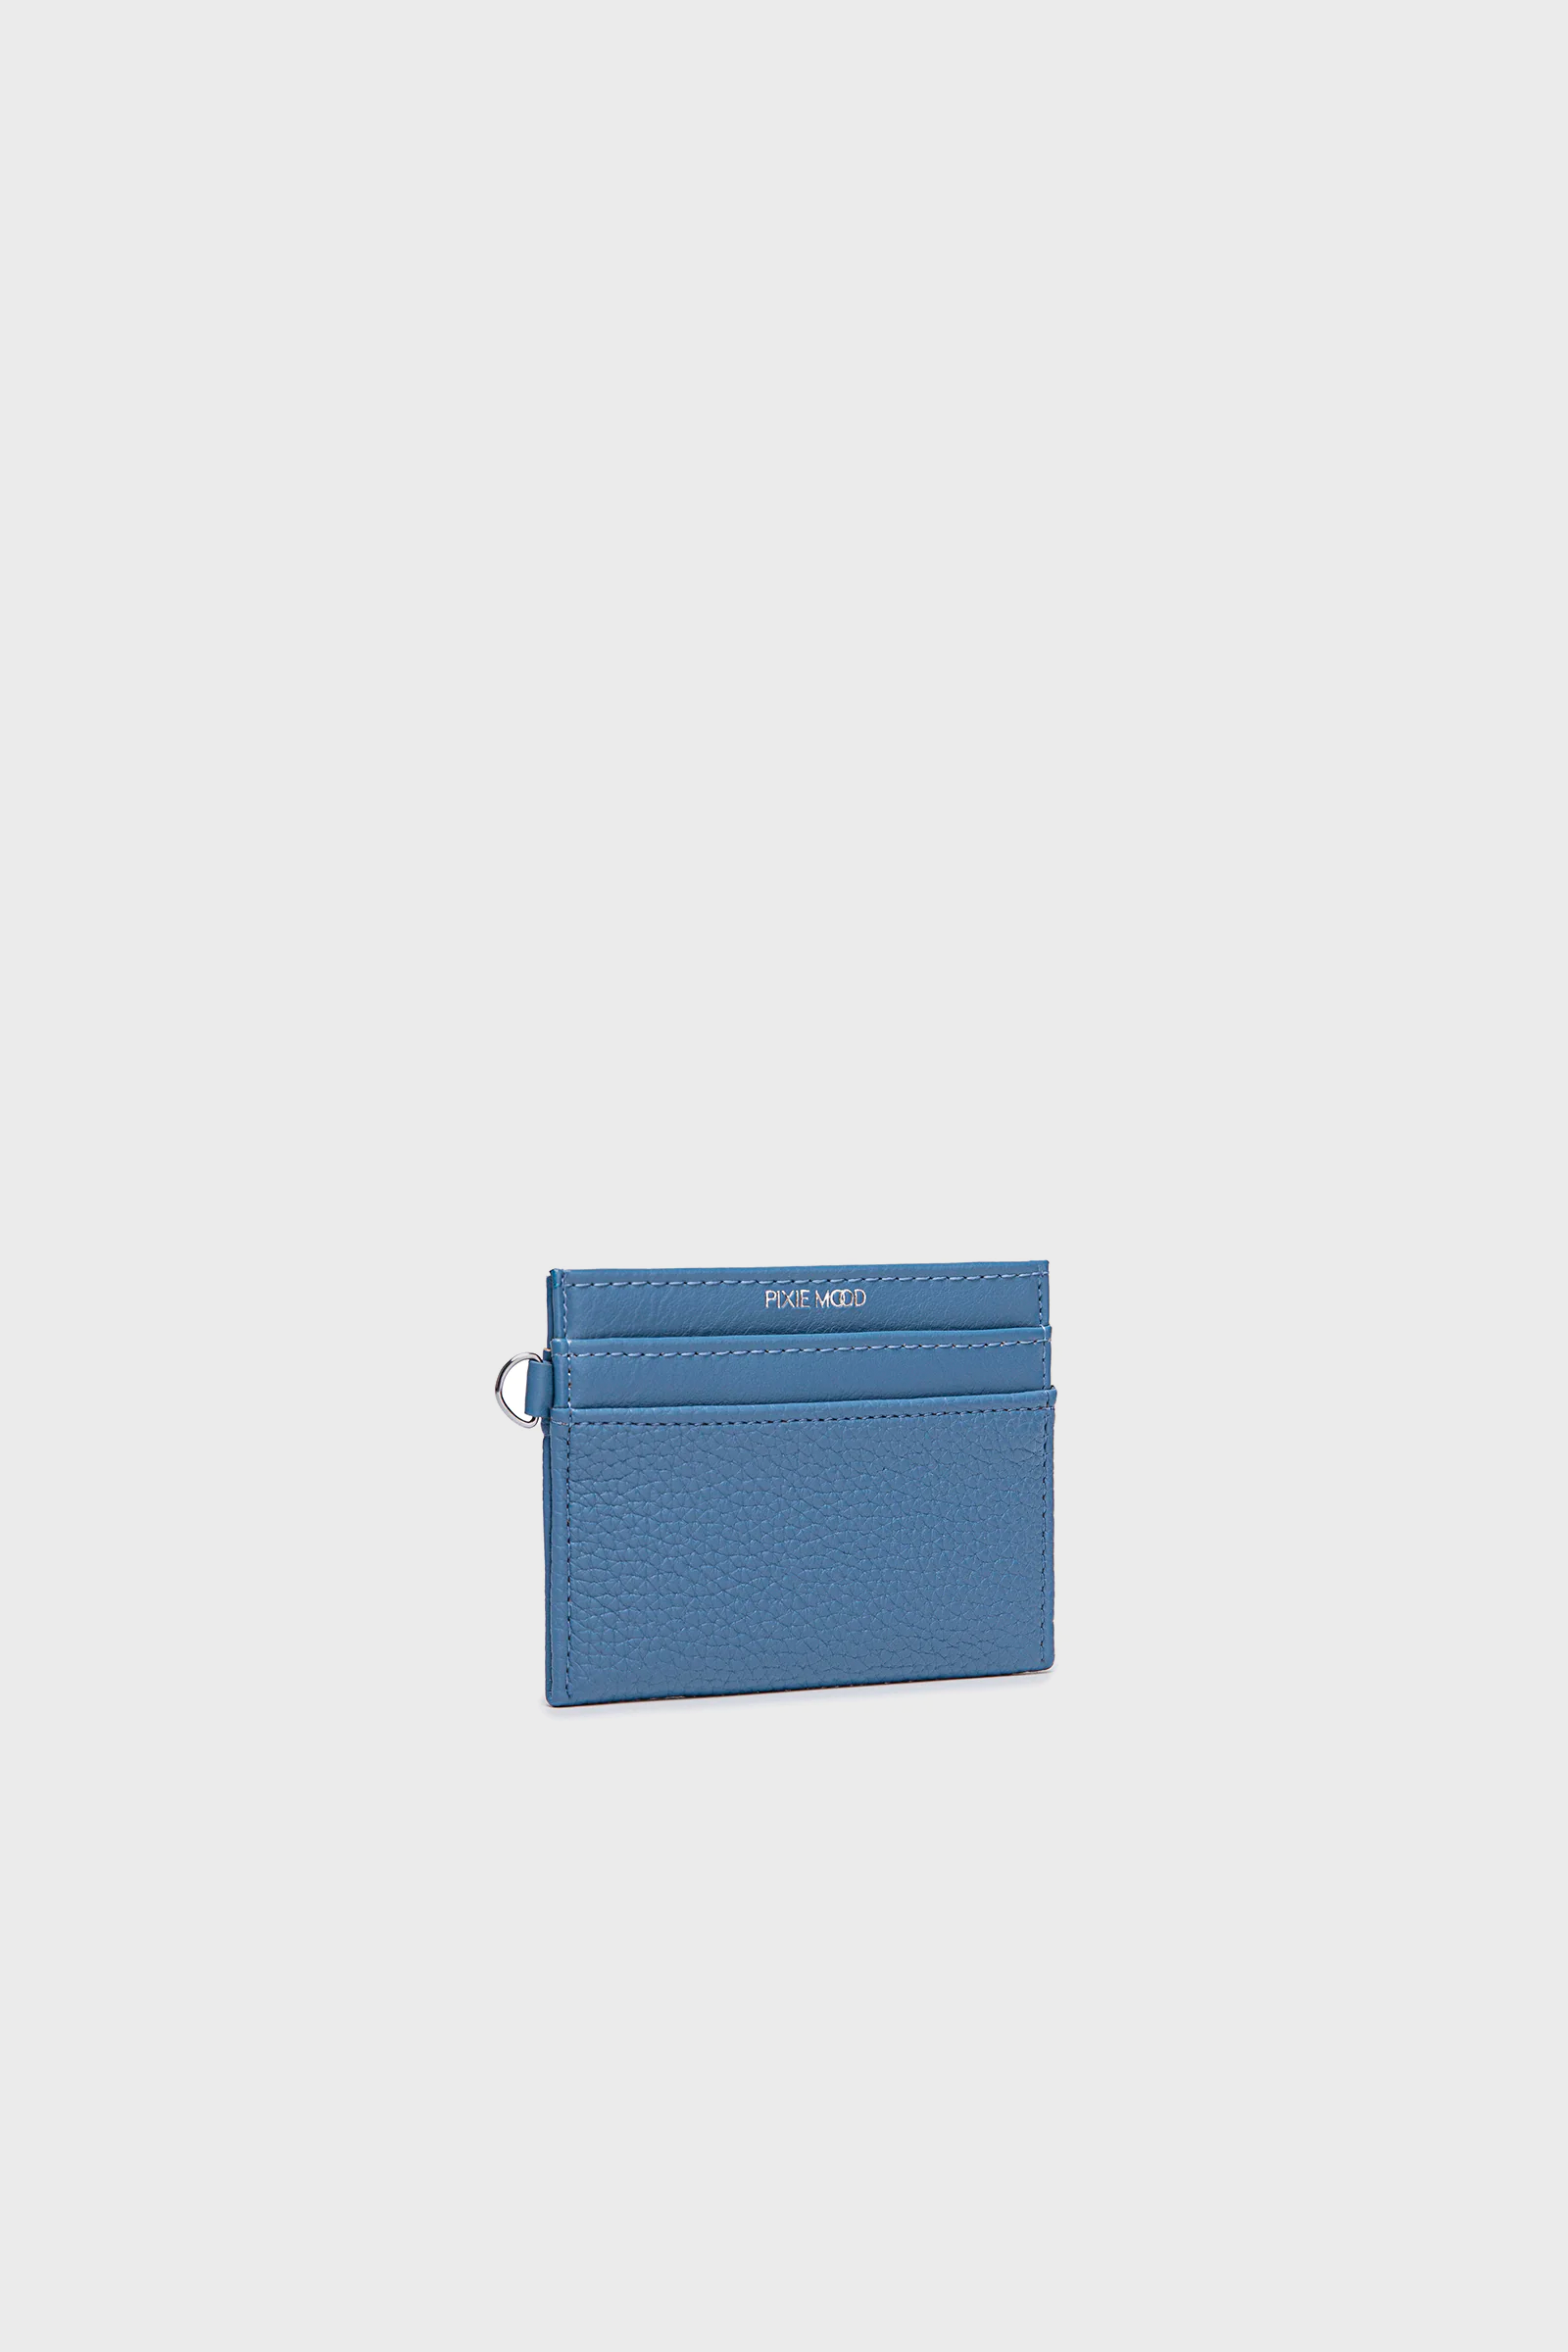 Pixie Mood Alex Cardholder in Pebbled Muted Blue